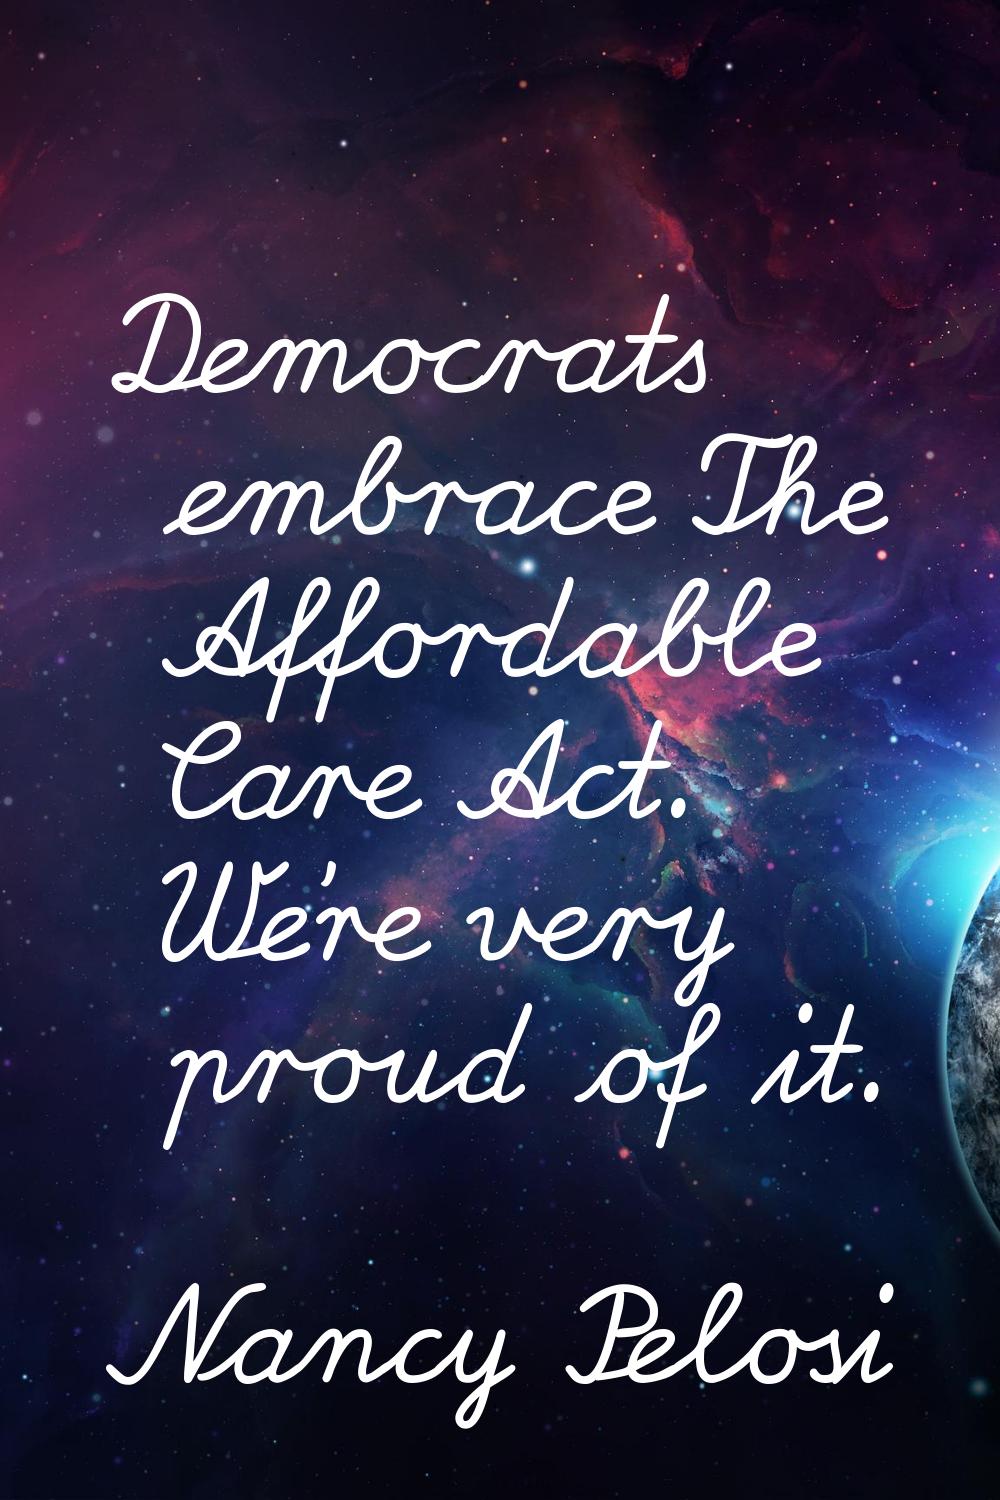 Democrats embrace The Affordable Care Act. We're very proud of it.